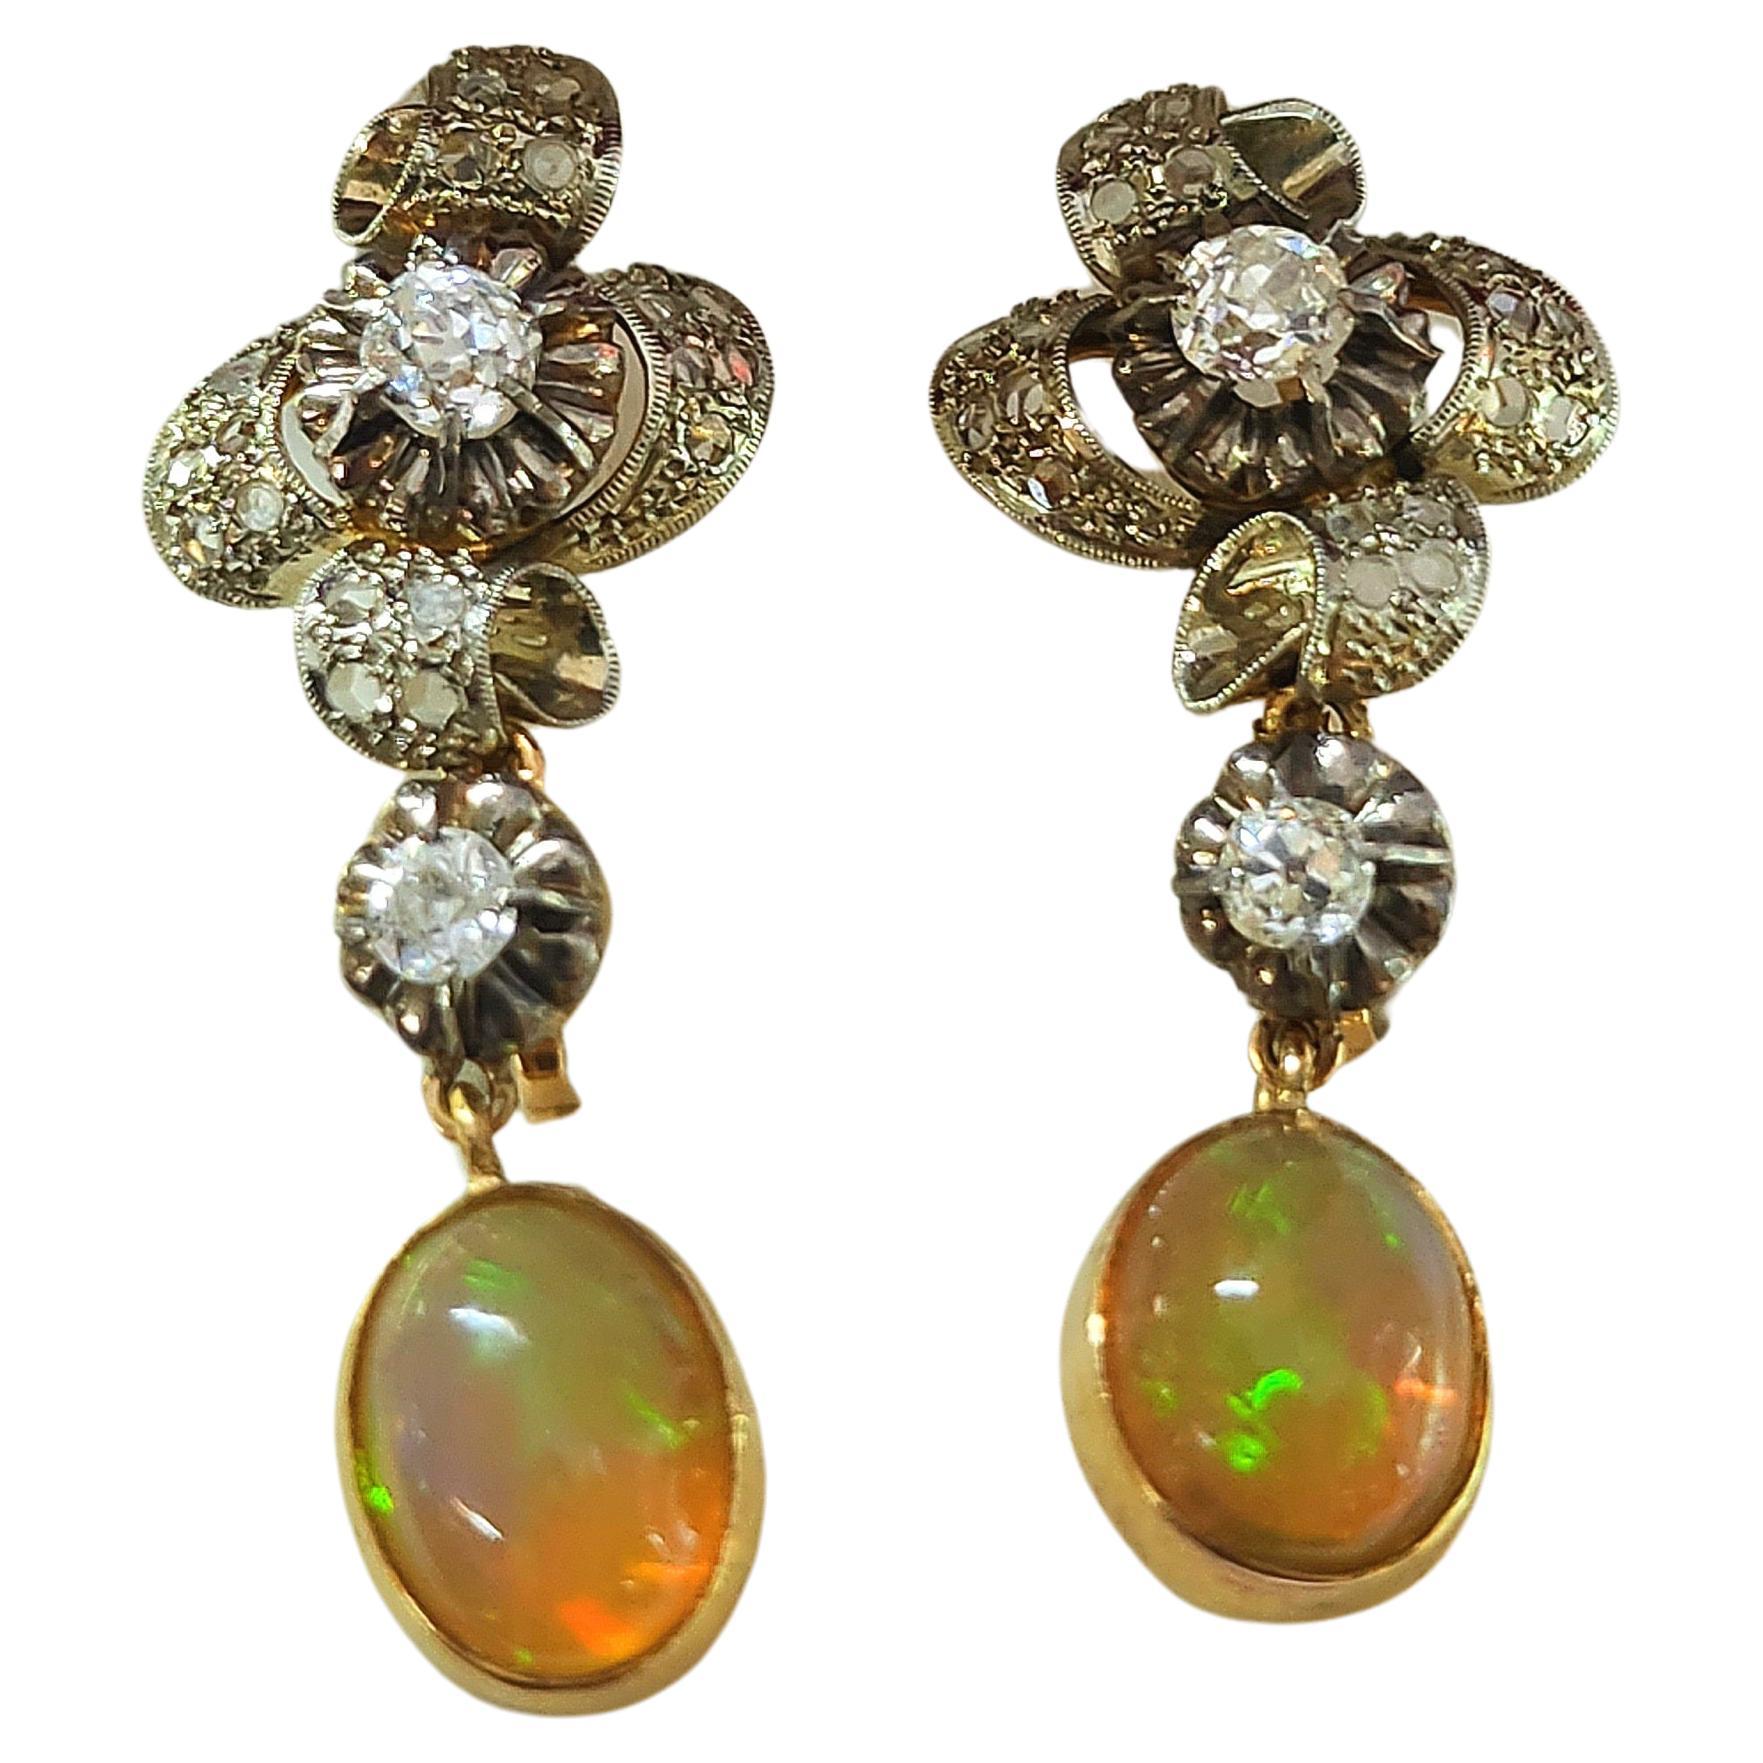 Antique earrings in 18k 2 tone colors gold with an estimate old mine cut diamond weight of 0.90 carats H color vs clearity dangling with natural australian fire opal in oval cut earrings hall marked on the back